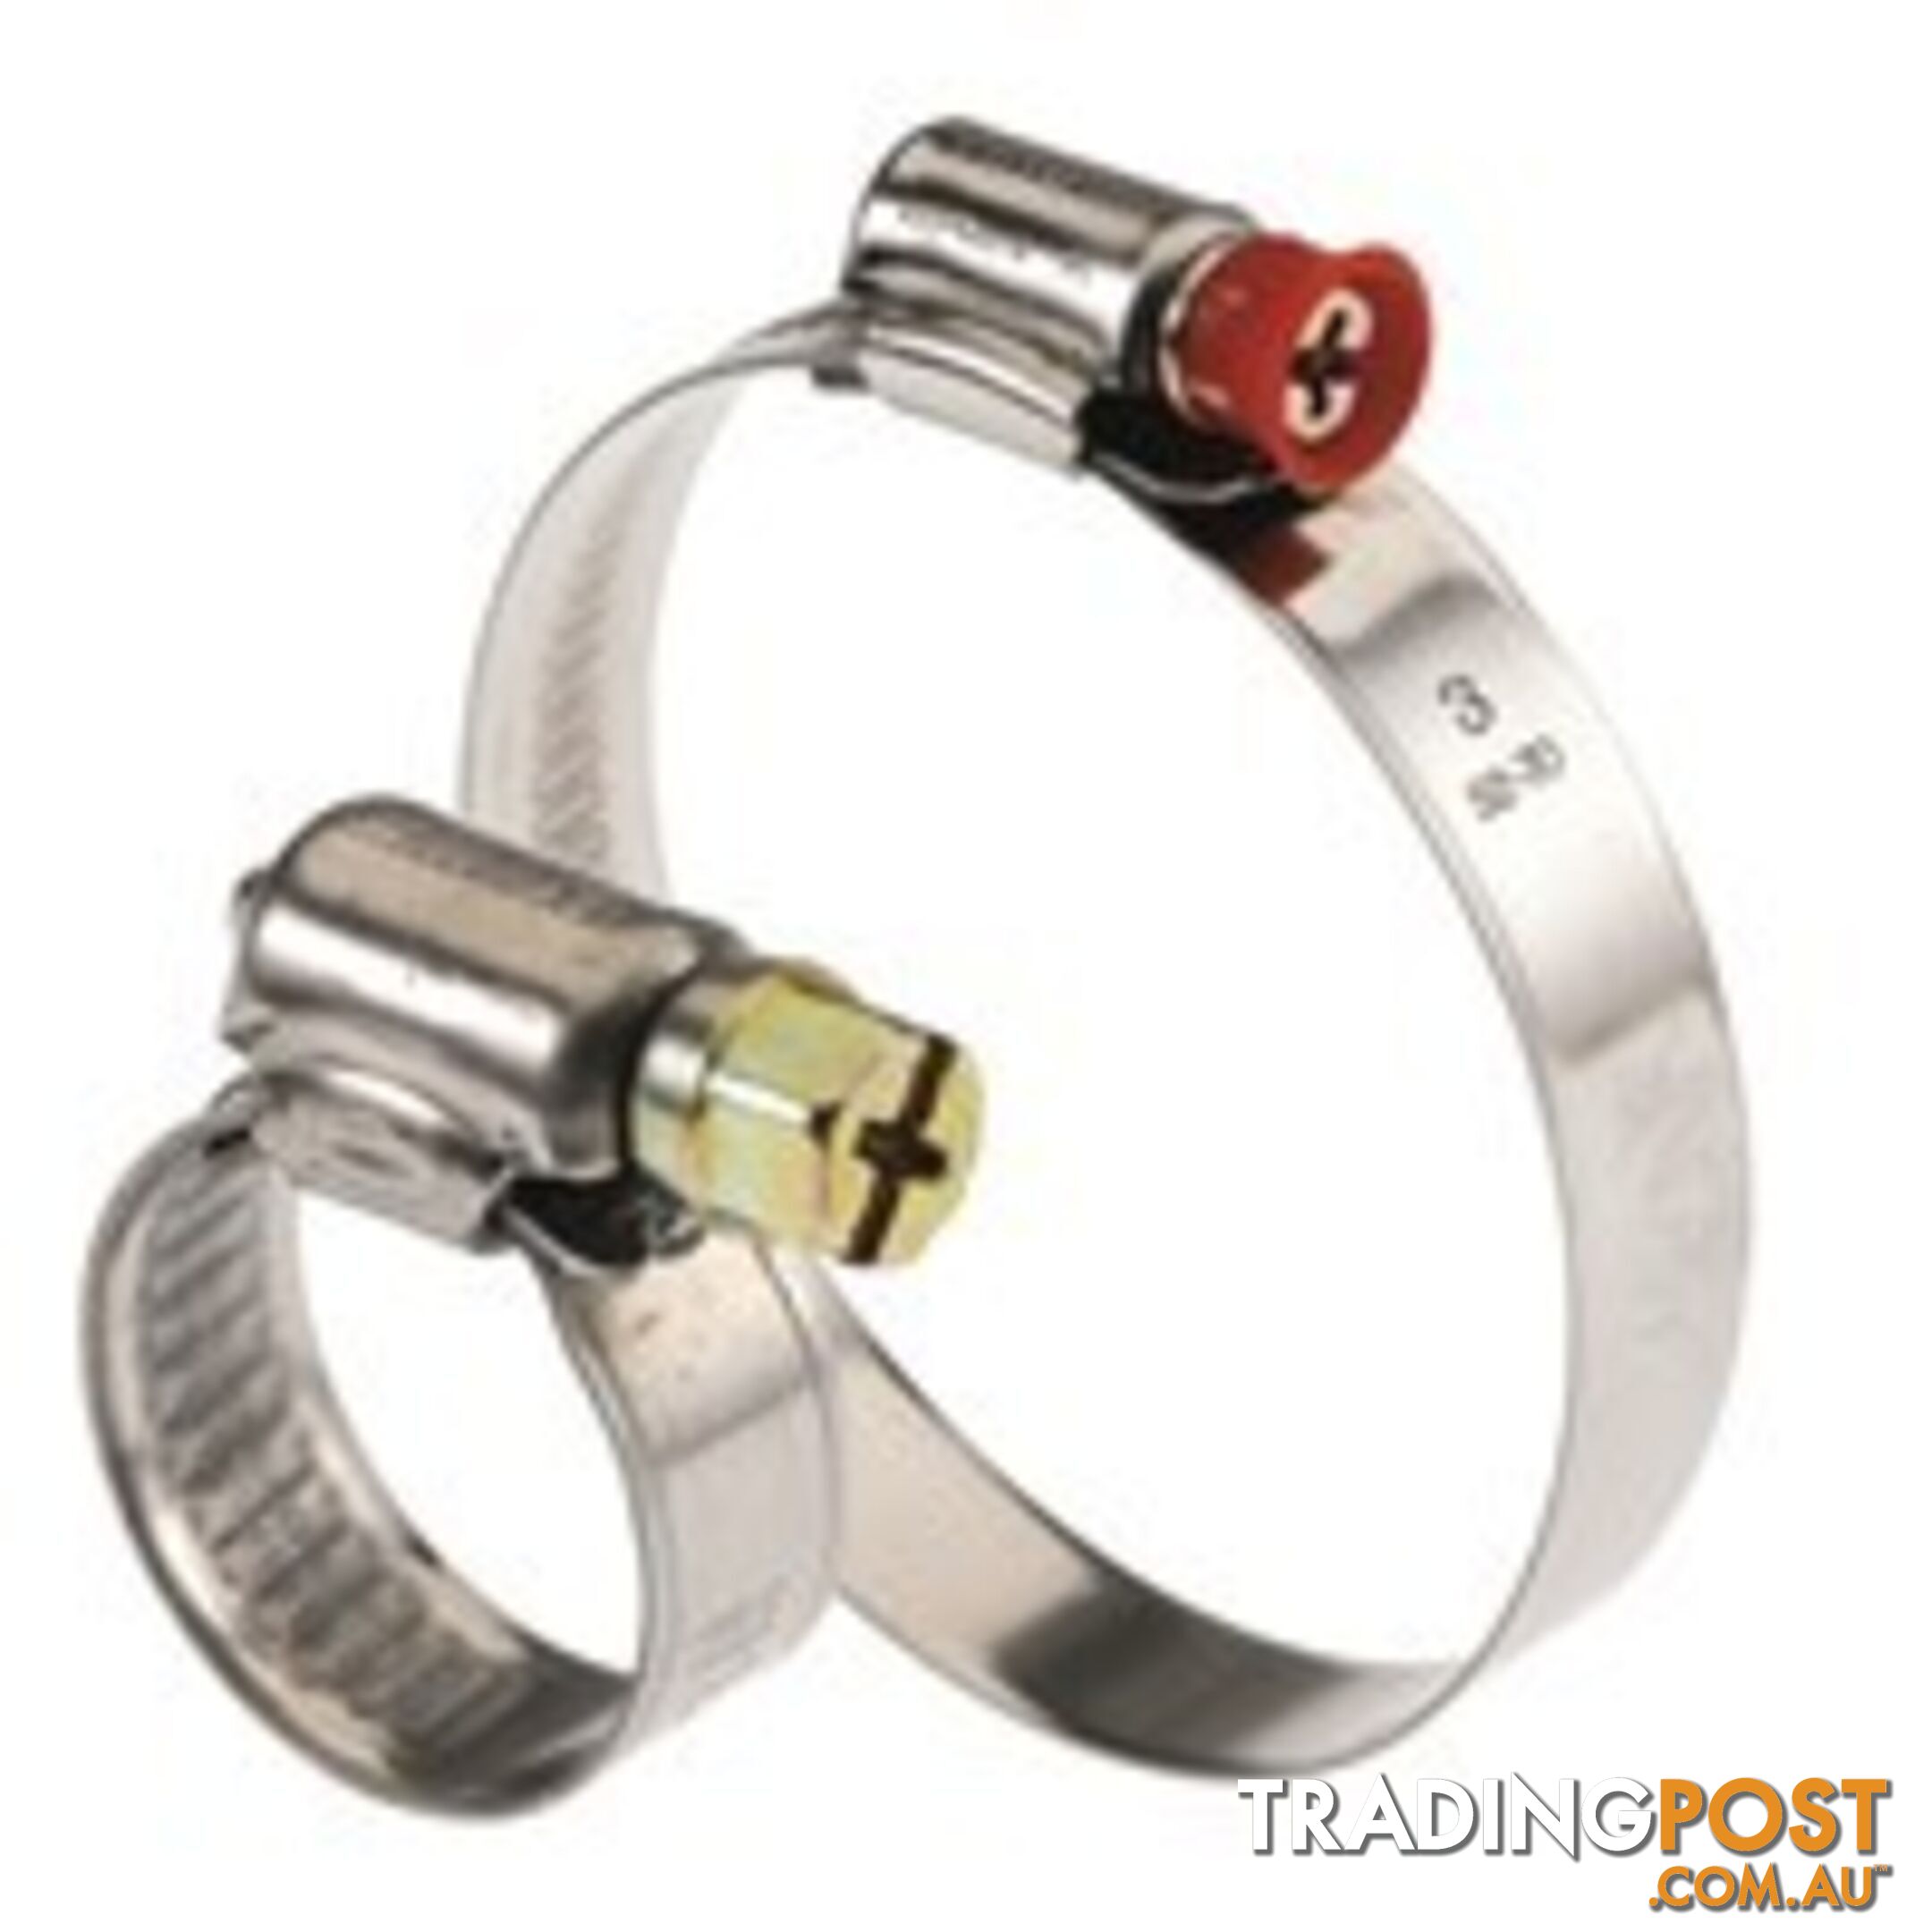 Tridon Part S.S Hose Clamp 52mm-70mm Multi Purpose Solid Band 10pk SKU - MP3P